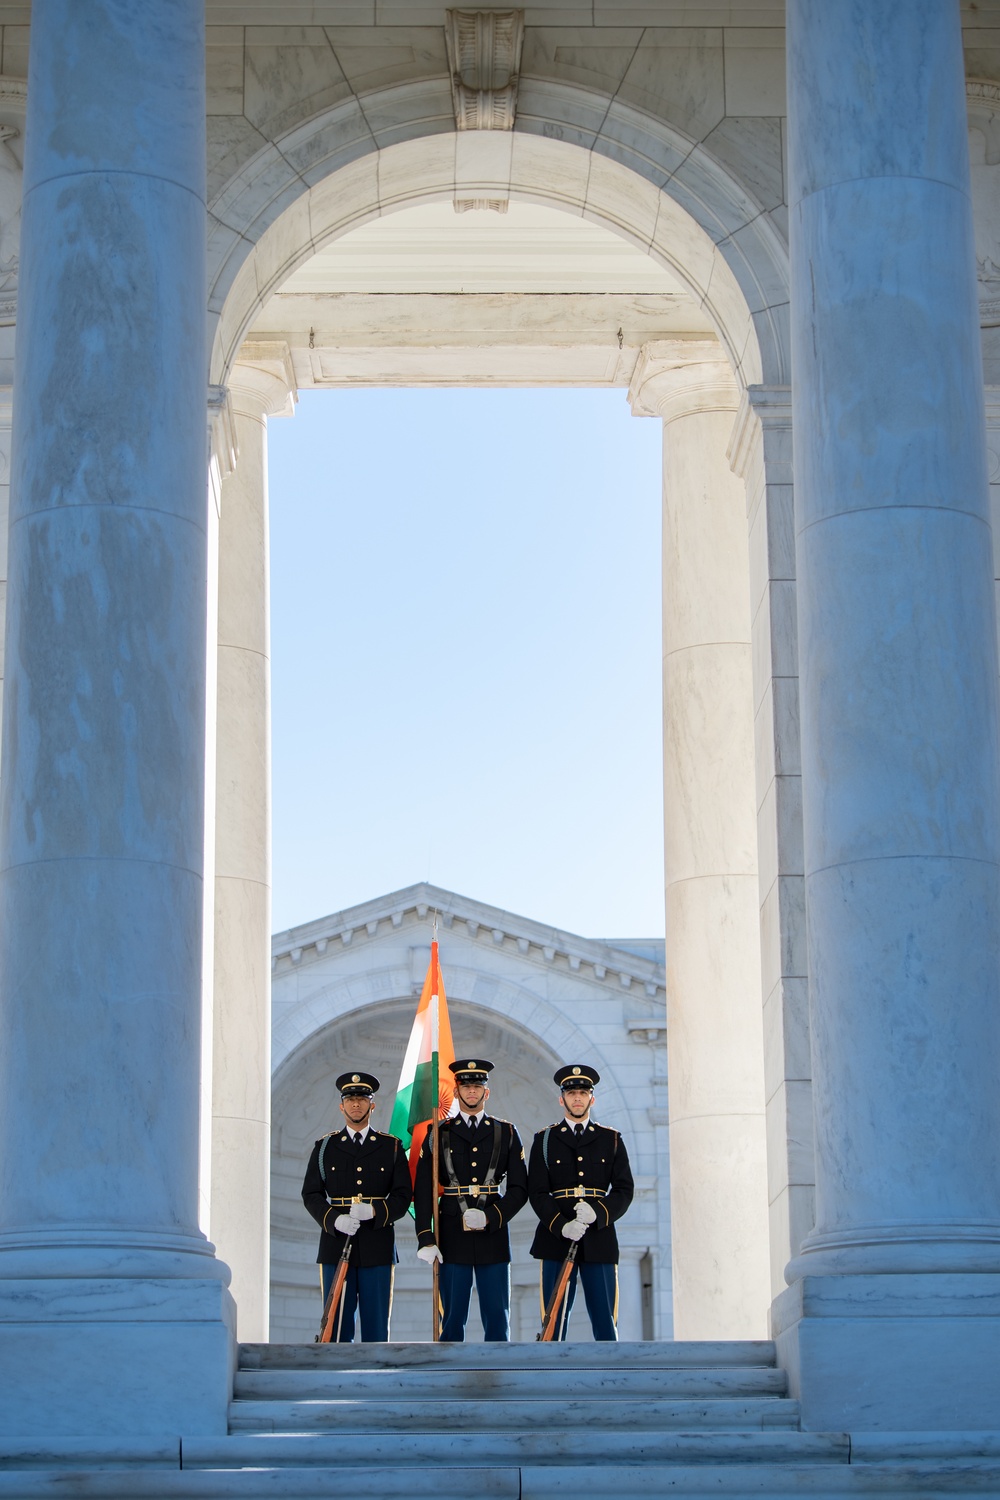 Wreath Ceremony in honor of the Chief of Defense of the Indian Armed Forces Gen. Bipin Rawat